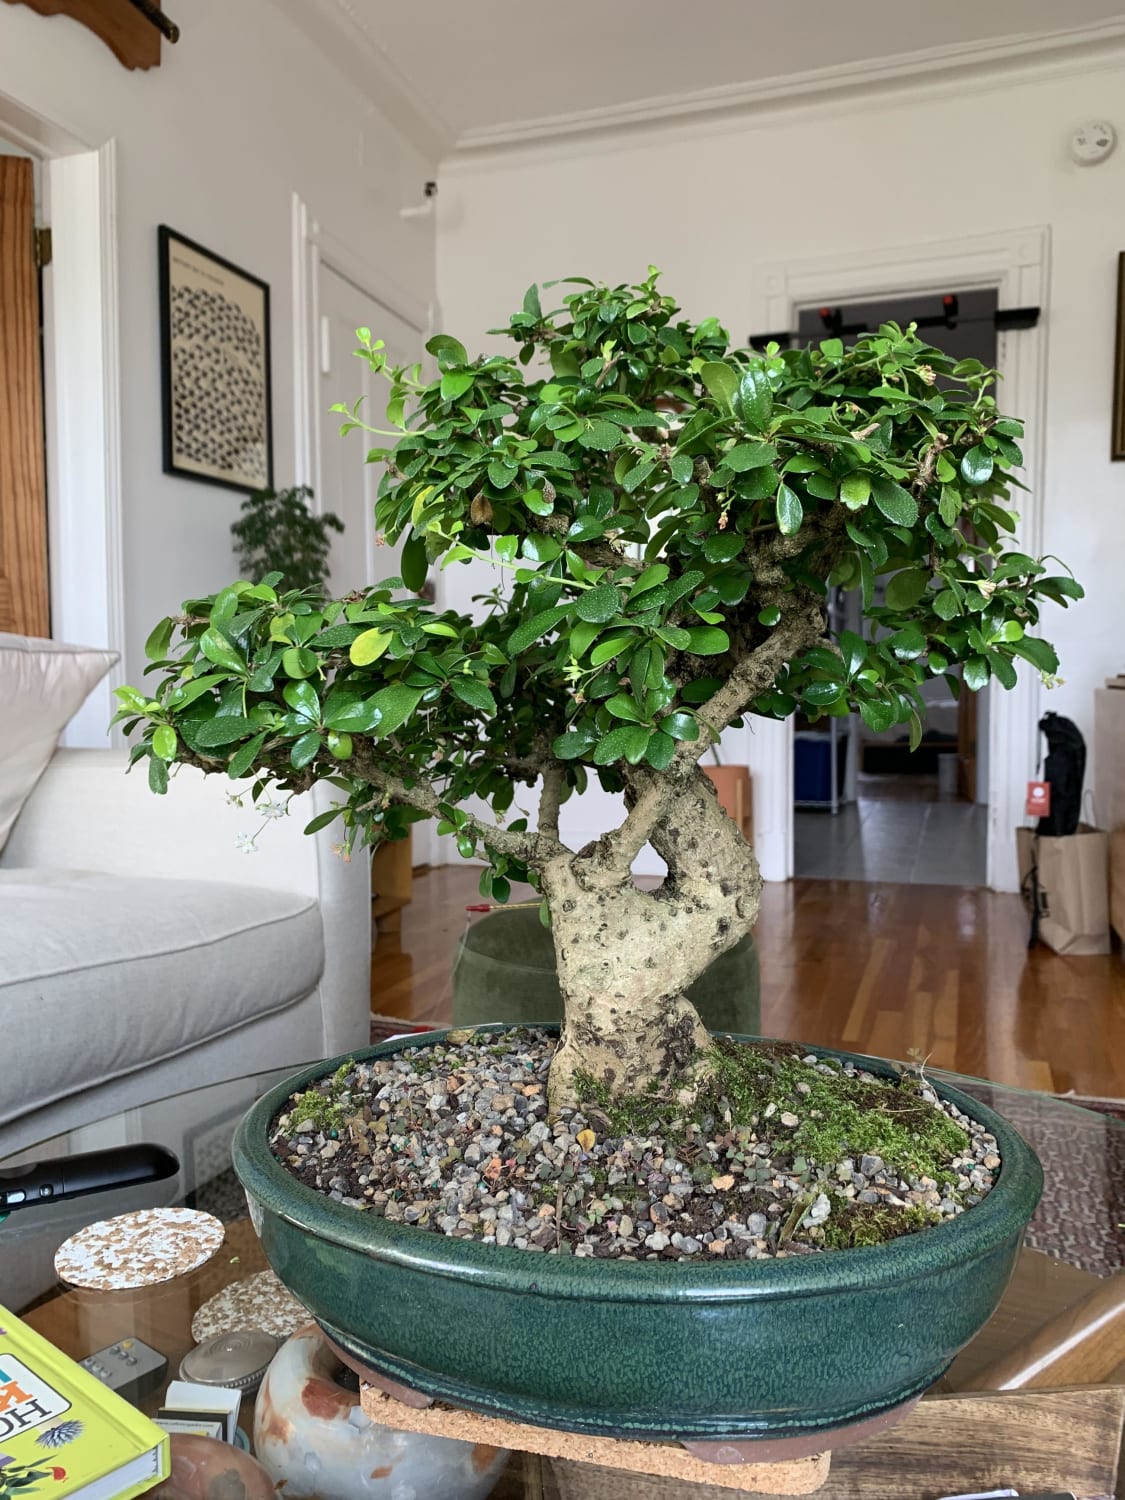 Gifted a 20 year old Fukien tea. This is my first bonsai and I'm terrified!